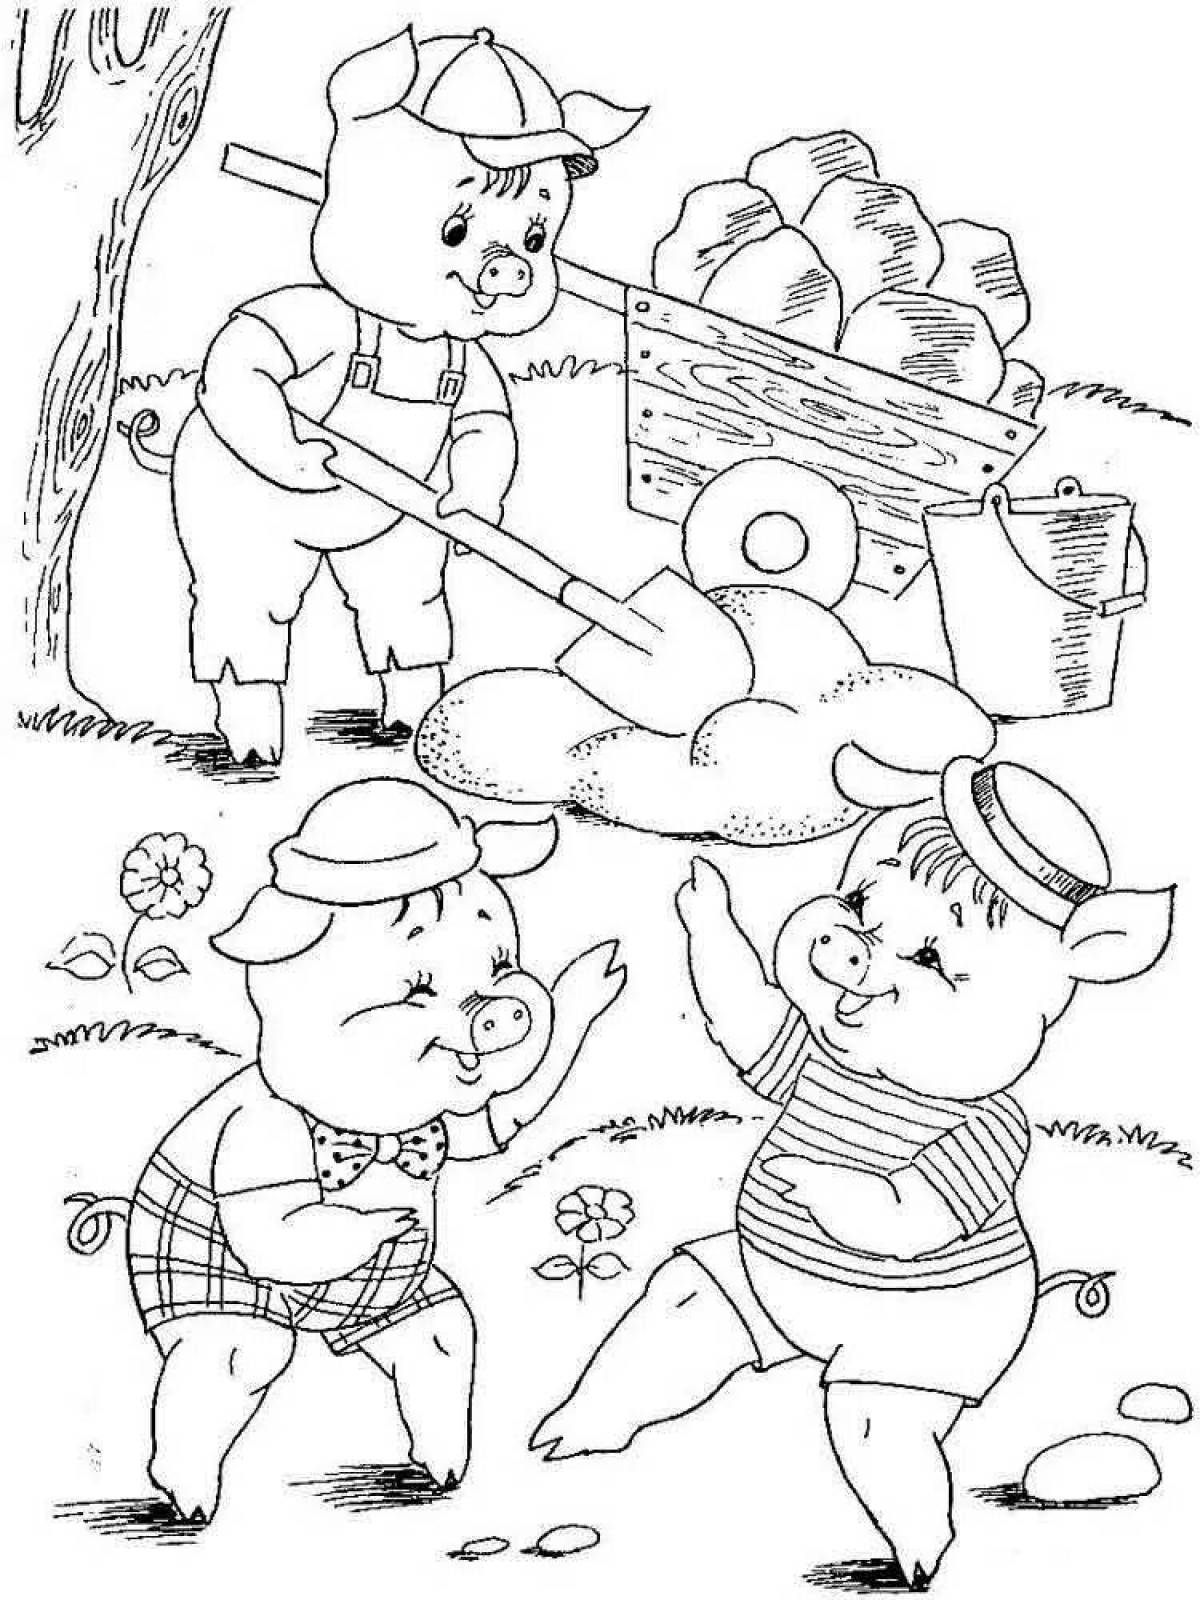 Adorable Three Little Pigs coloring book for 4-5 year olds